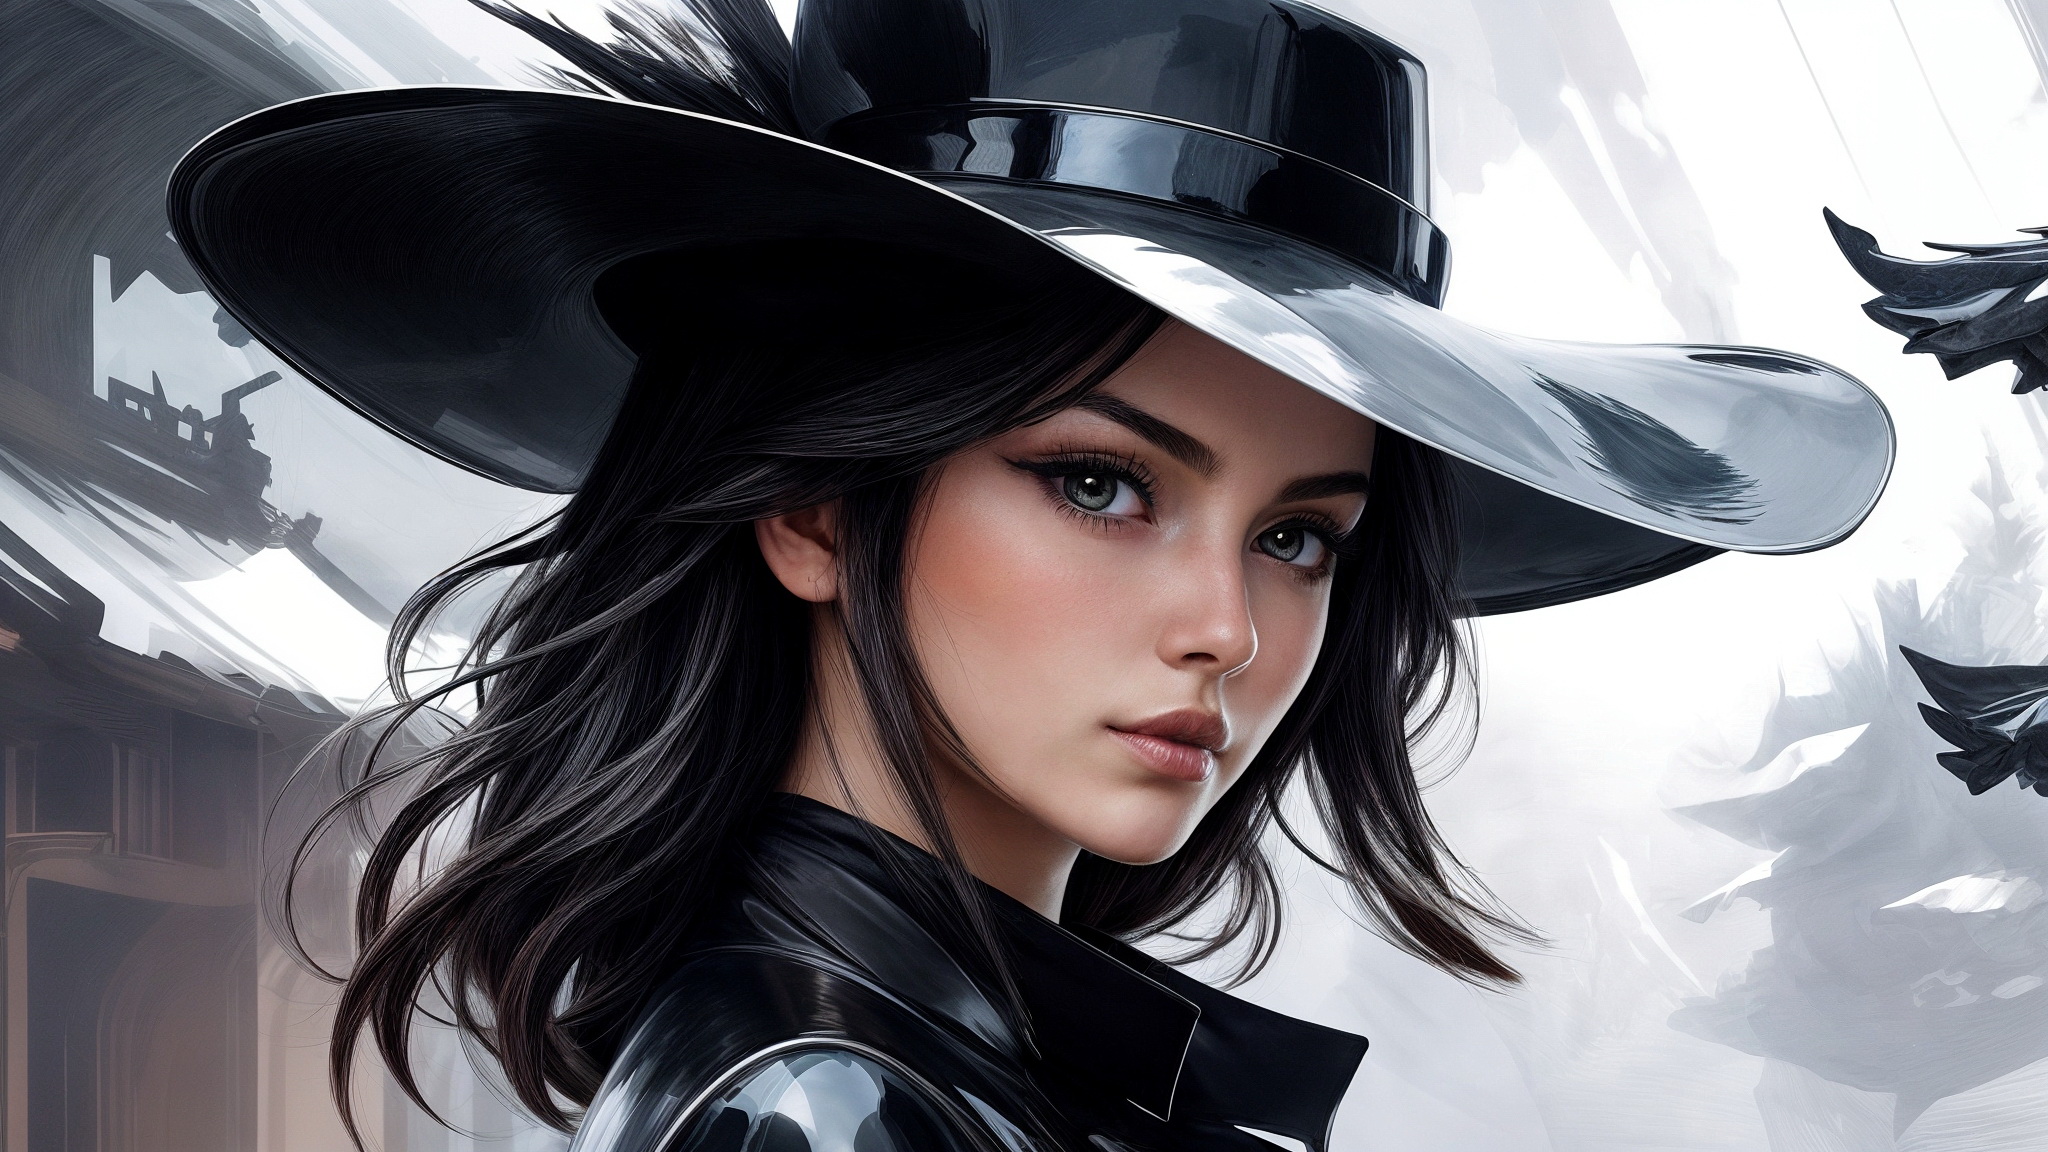 Portrait of a girl in a black wide-brimmed hat